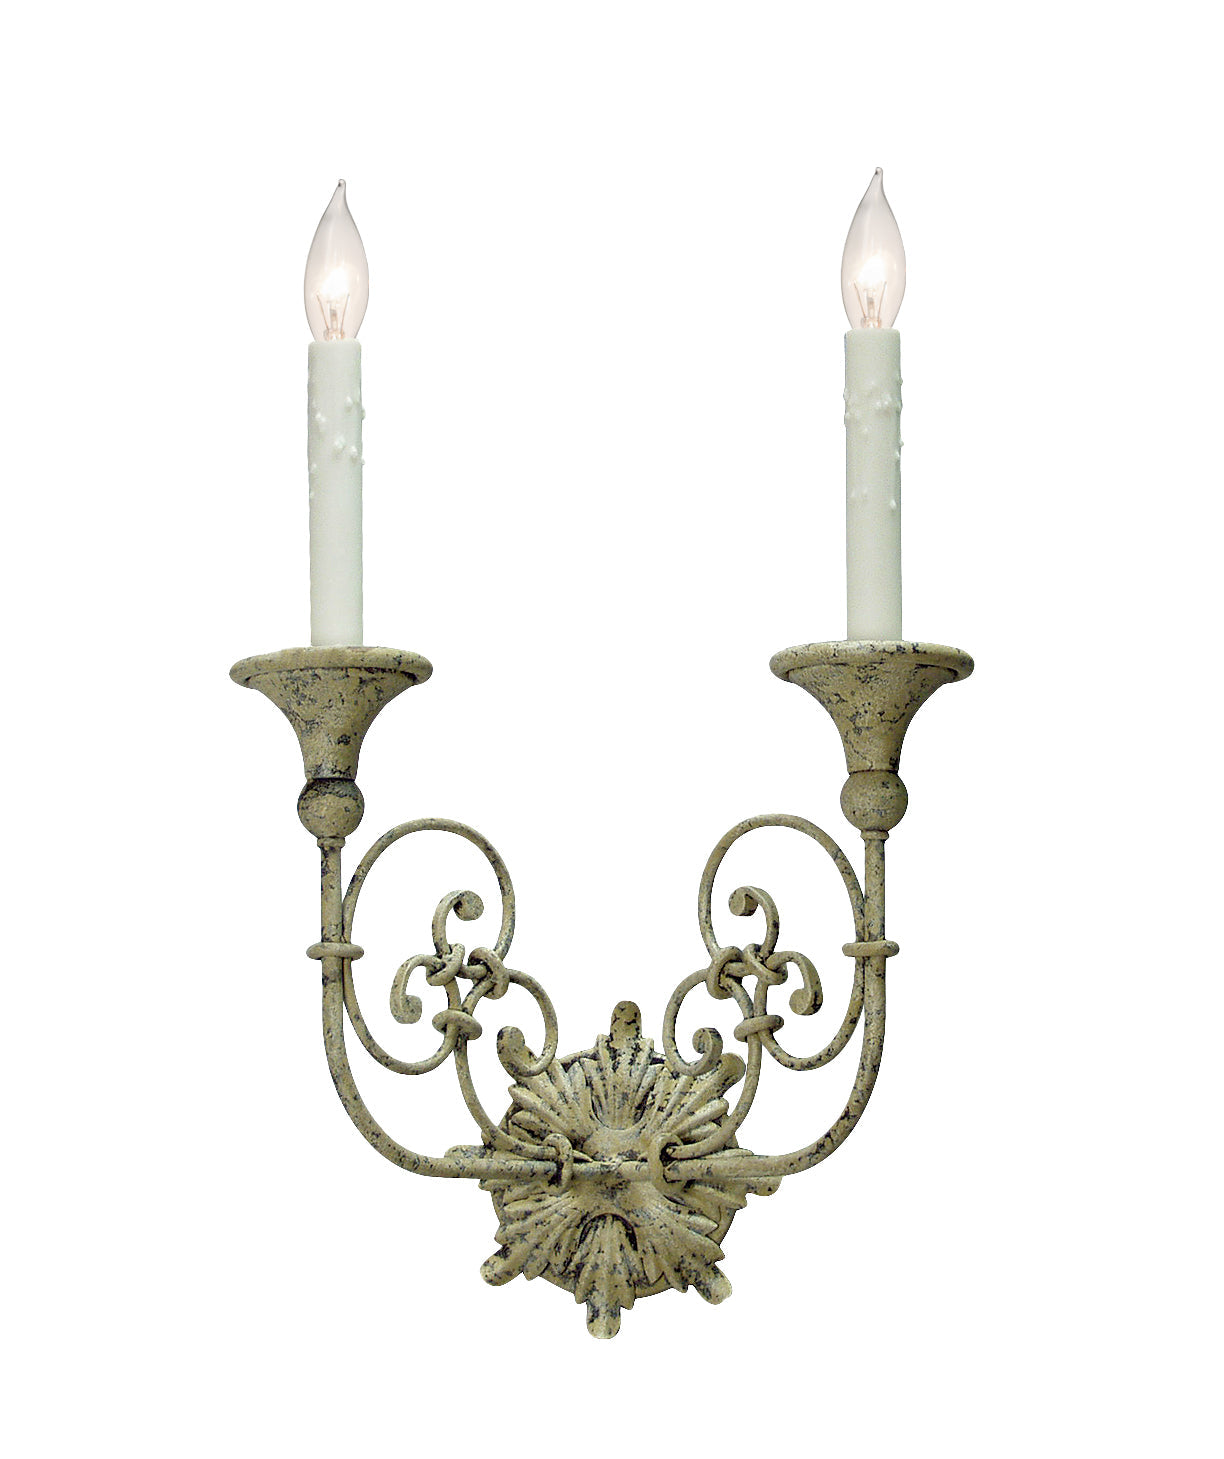 14" Rachelle 2-Light Wall Sconce by 2nd Ave Lighting